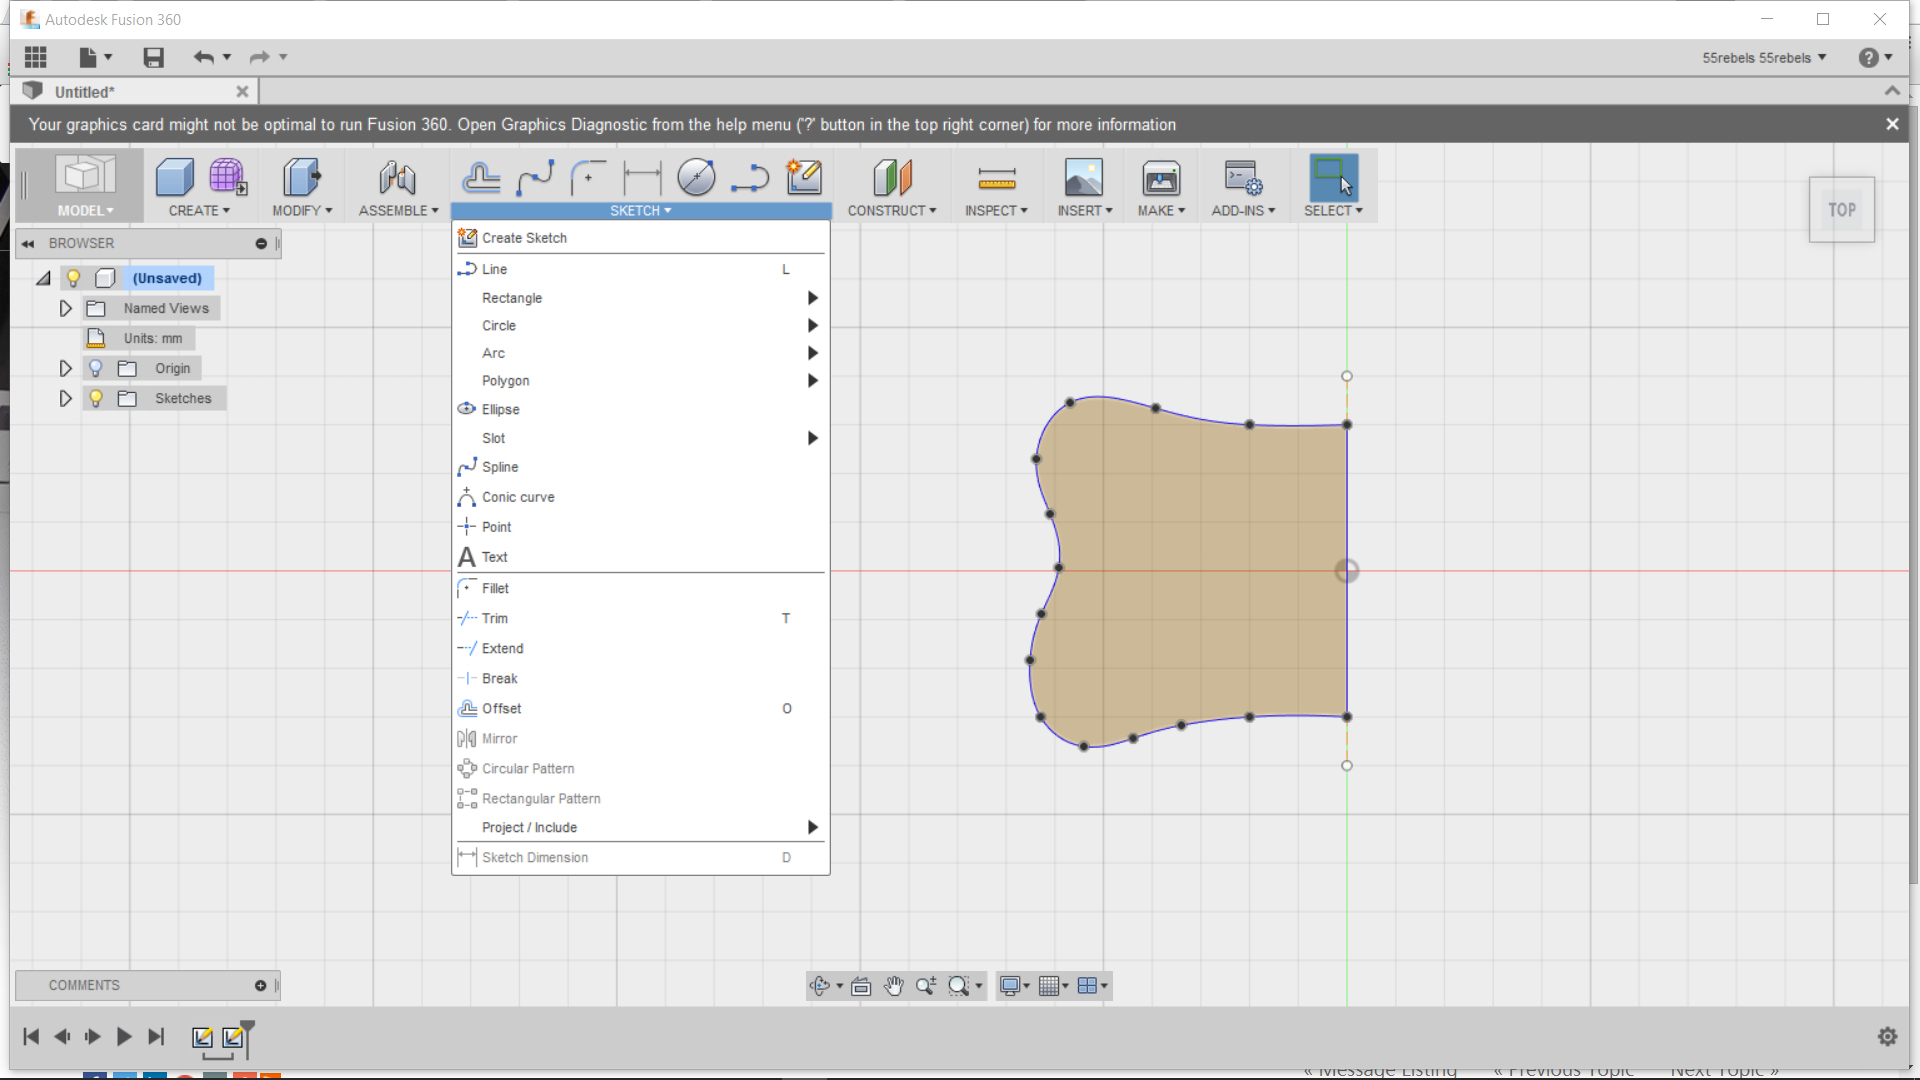 Solved: Mirror tool not available to use - Autodesk Community - Fusion 360